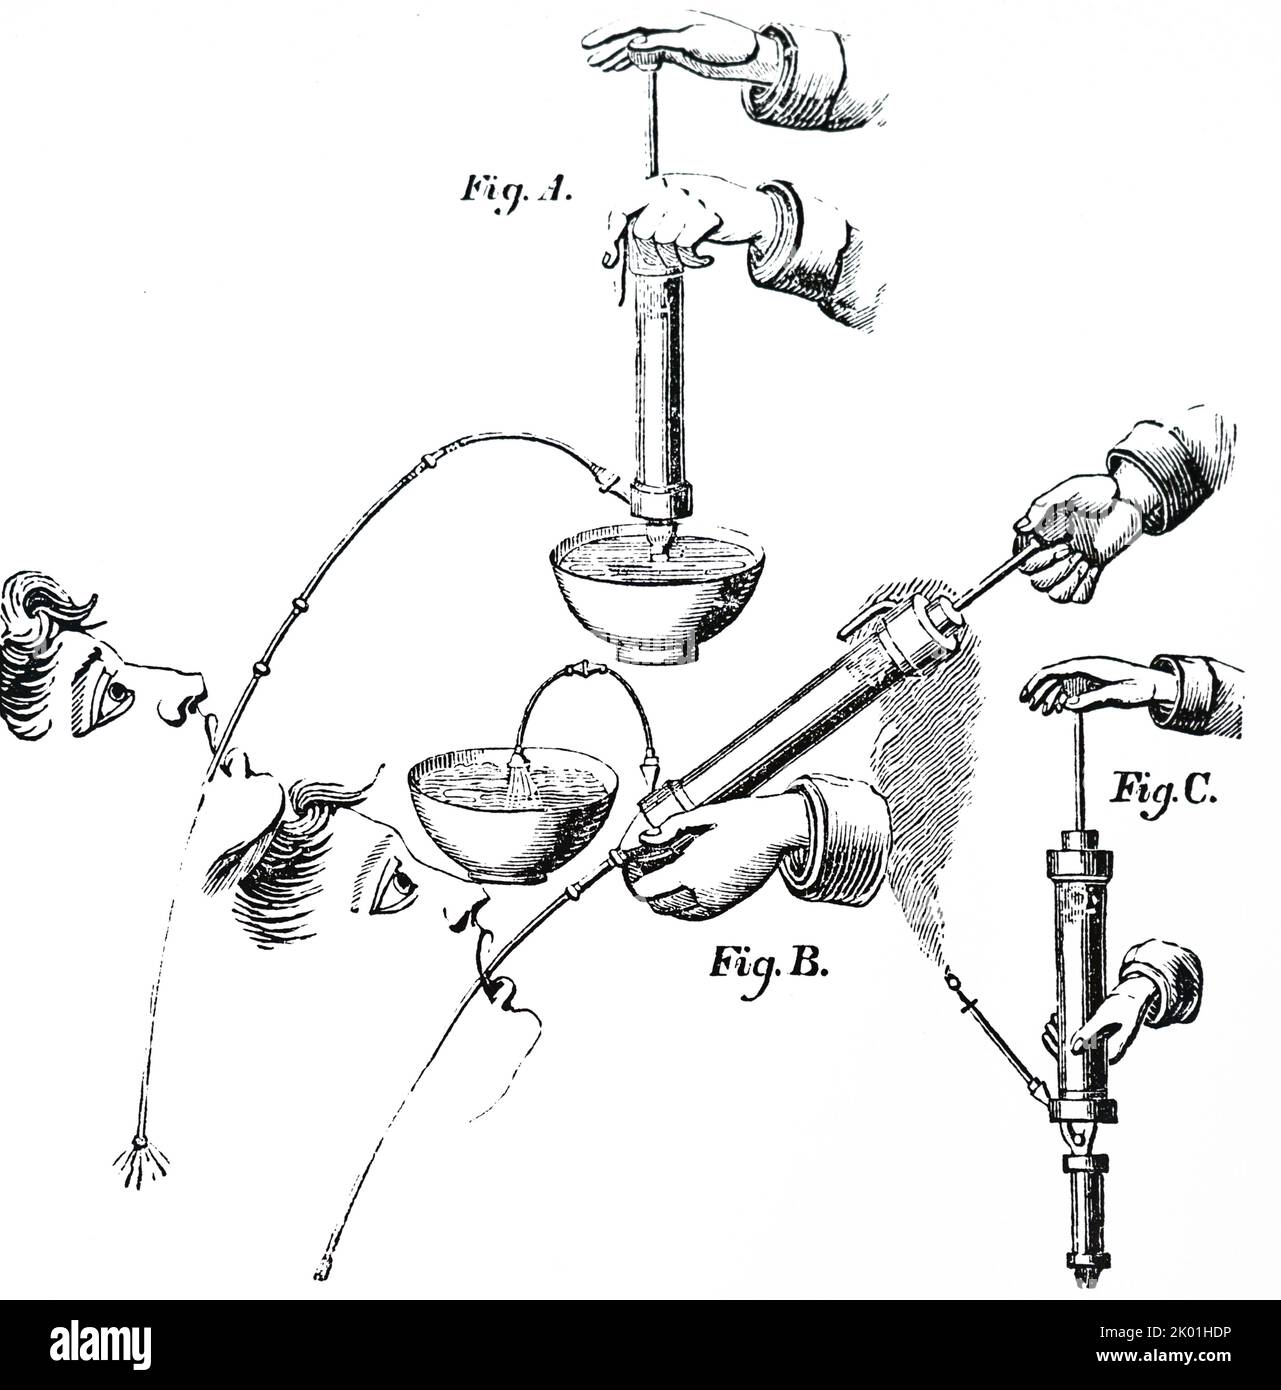 Reed's (Reid's) Syringe used at St Thomas's Hospital, London to pump out the stomach in cases of poisoning. Fig. A: Fluid is being forced into the stomach. Fig B: Contents of the stomach are being pumped into a receiver. Fig. C: Syringe for fumigating the intestines with tobacco smoke. From Alexander Jamieson A Dictionary of Mechanical Science, Arts, Manufactures and Miscellaneous Knowledge, London, 1833. Stock Photo